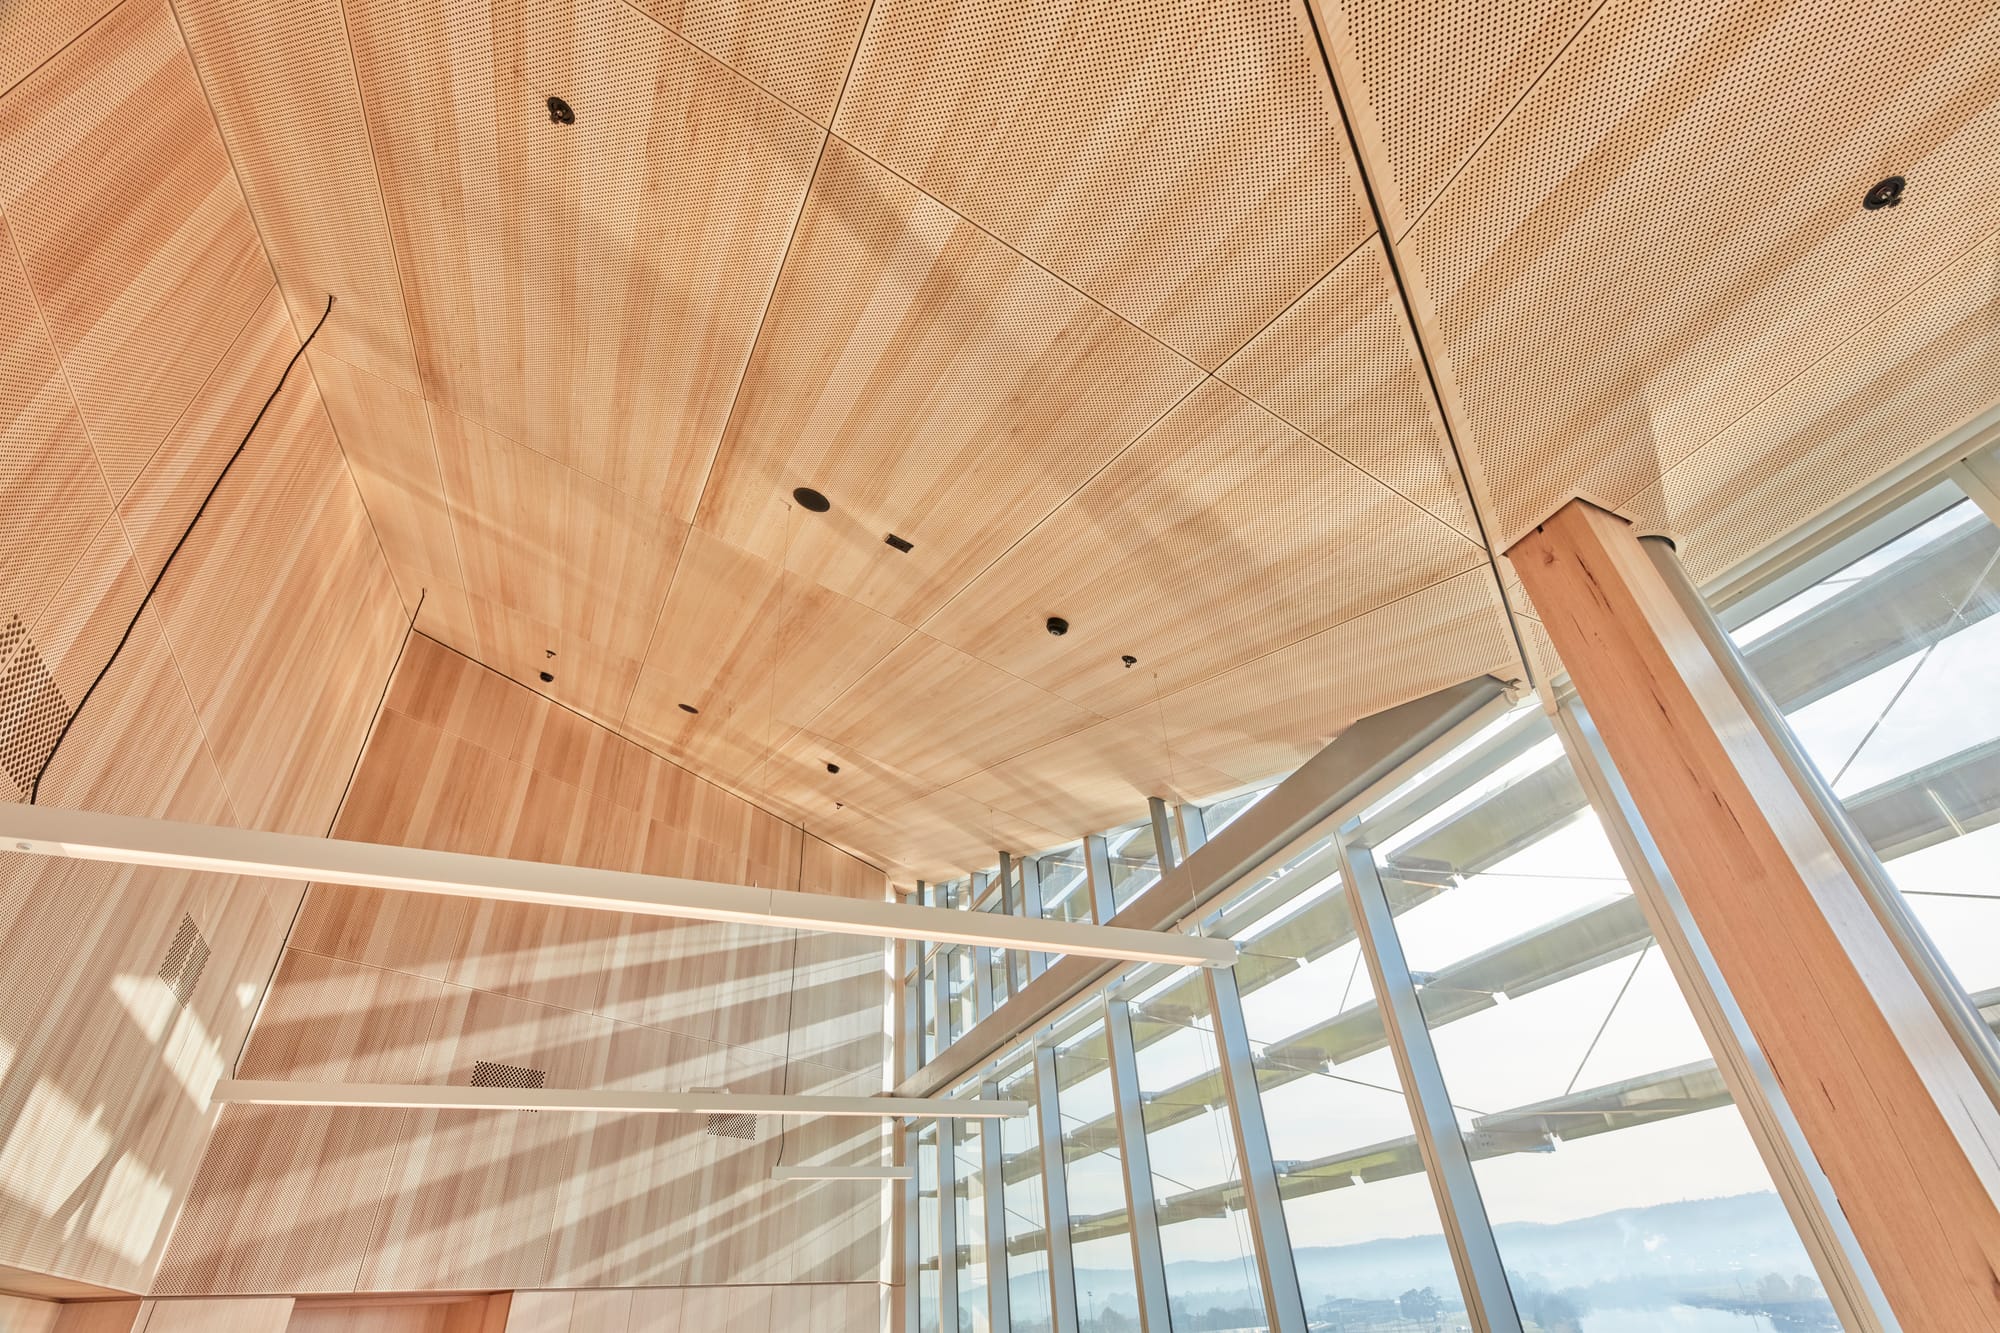 This image captures the interior ceiling structure of a modern architectural space. The ceiling is composed of light wooden panels with a subtle, natural grain pattern, arranged in a faceted design that creates a dynamic and angular appearance. Sleek, white beams support the ceiling, intersecting with vertical wooden columns that match the panels. The columns are set against a backdrop of tall glass windows that reveal a bright, clear sky and hints of a distant horizon, suggesting the building is situated in a location with expansive views. The combination of wood and glass elements emphasizes the structure's contemporary design, while the sunlight streaming through lends the space a warm and welcoming atmosphere.